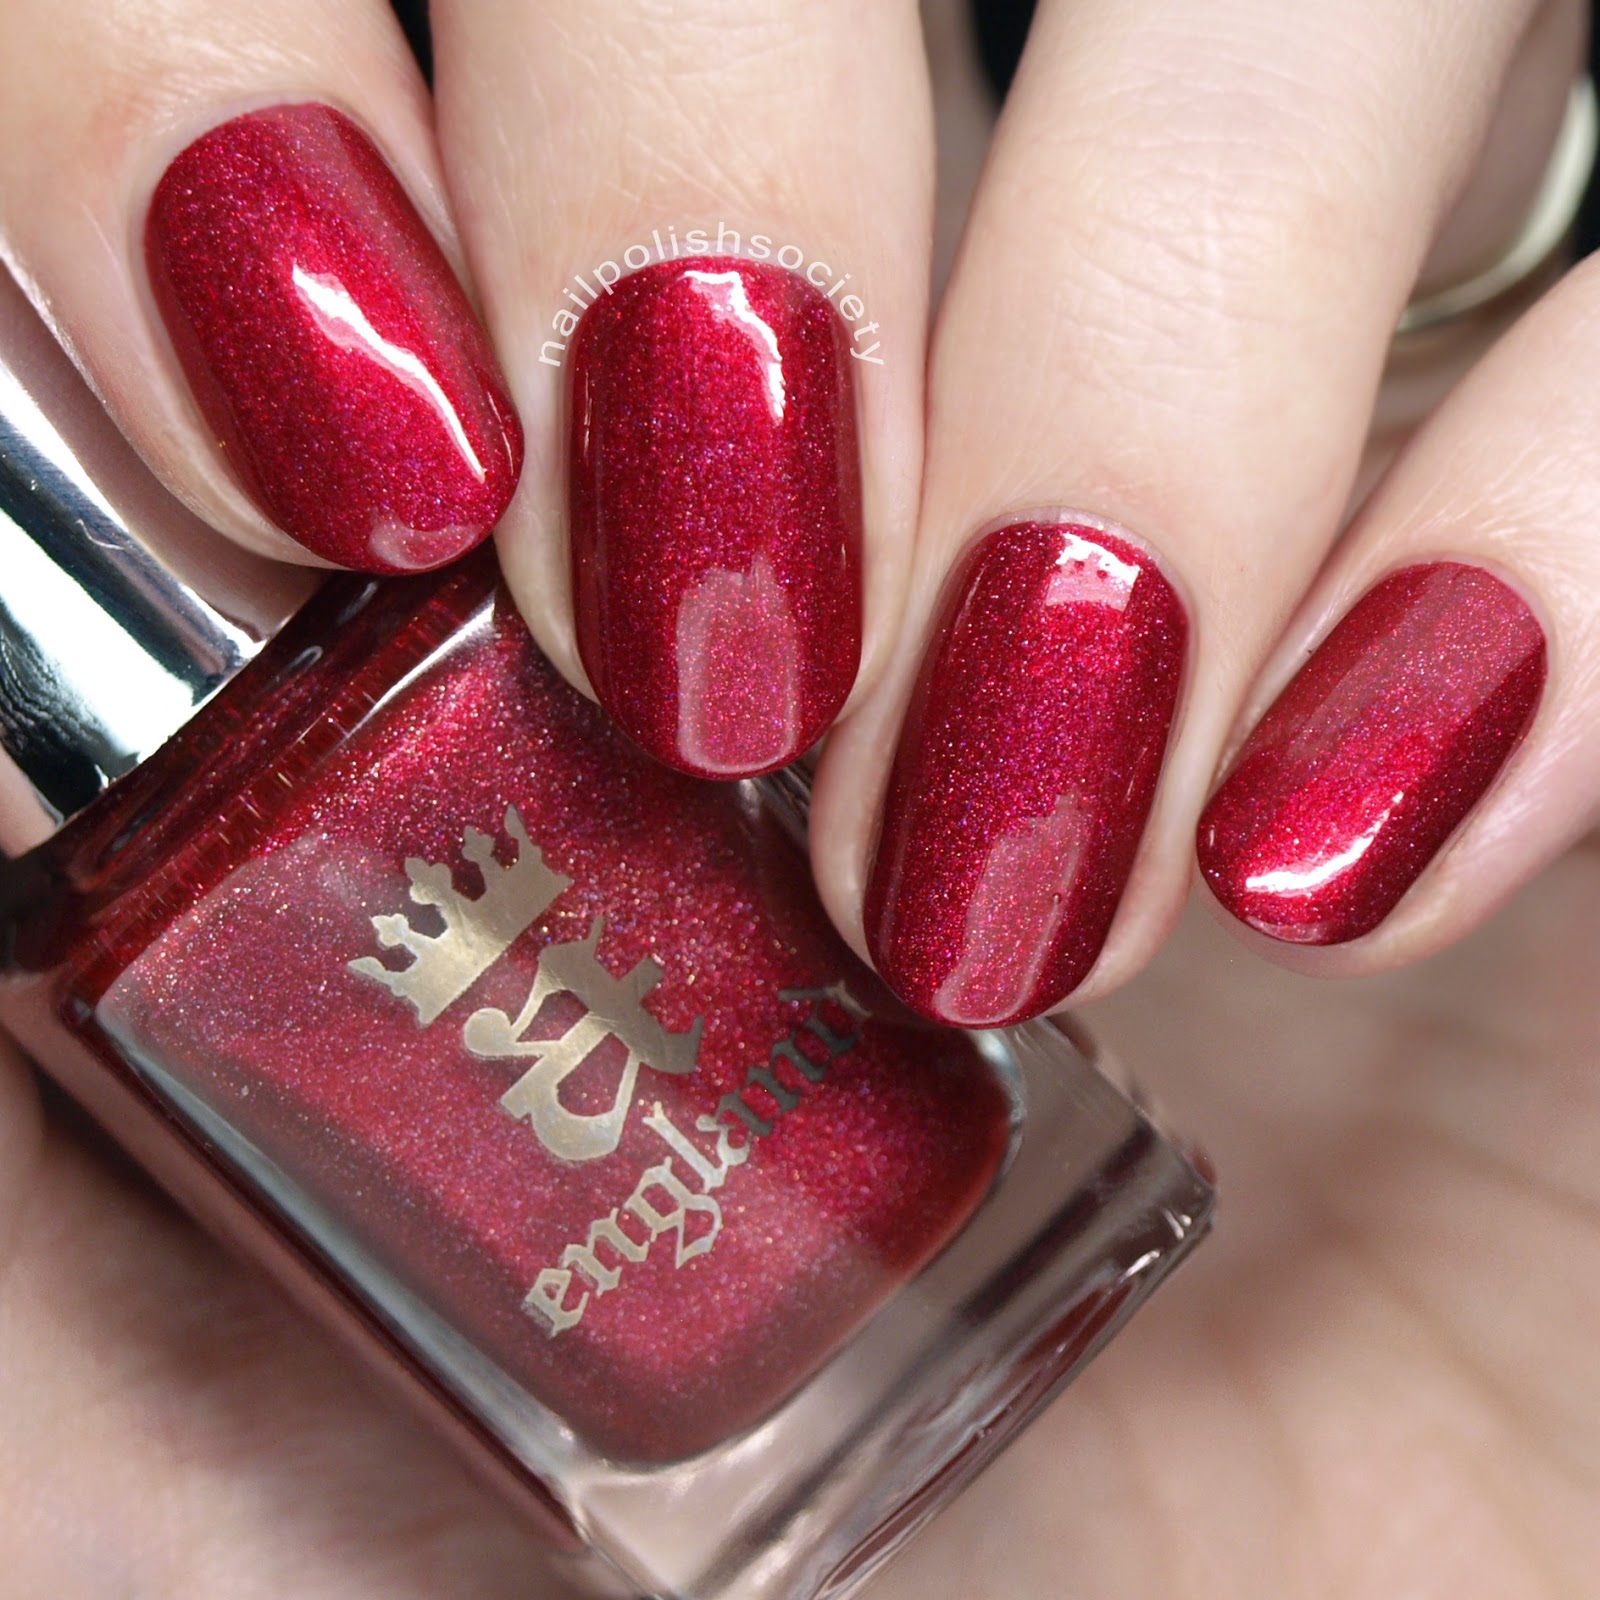 Nail Polish Society 14 Perfect Pink and Red Polishes for Valentine's Day